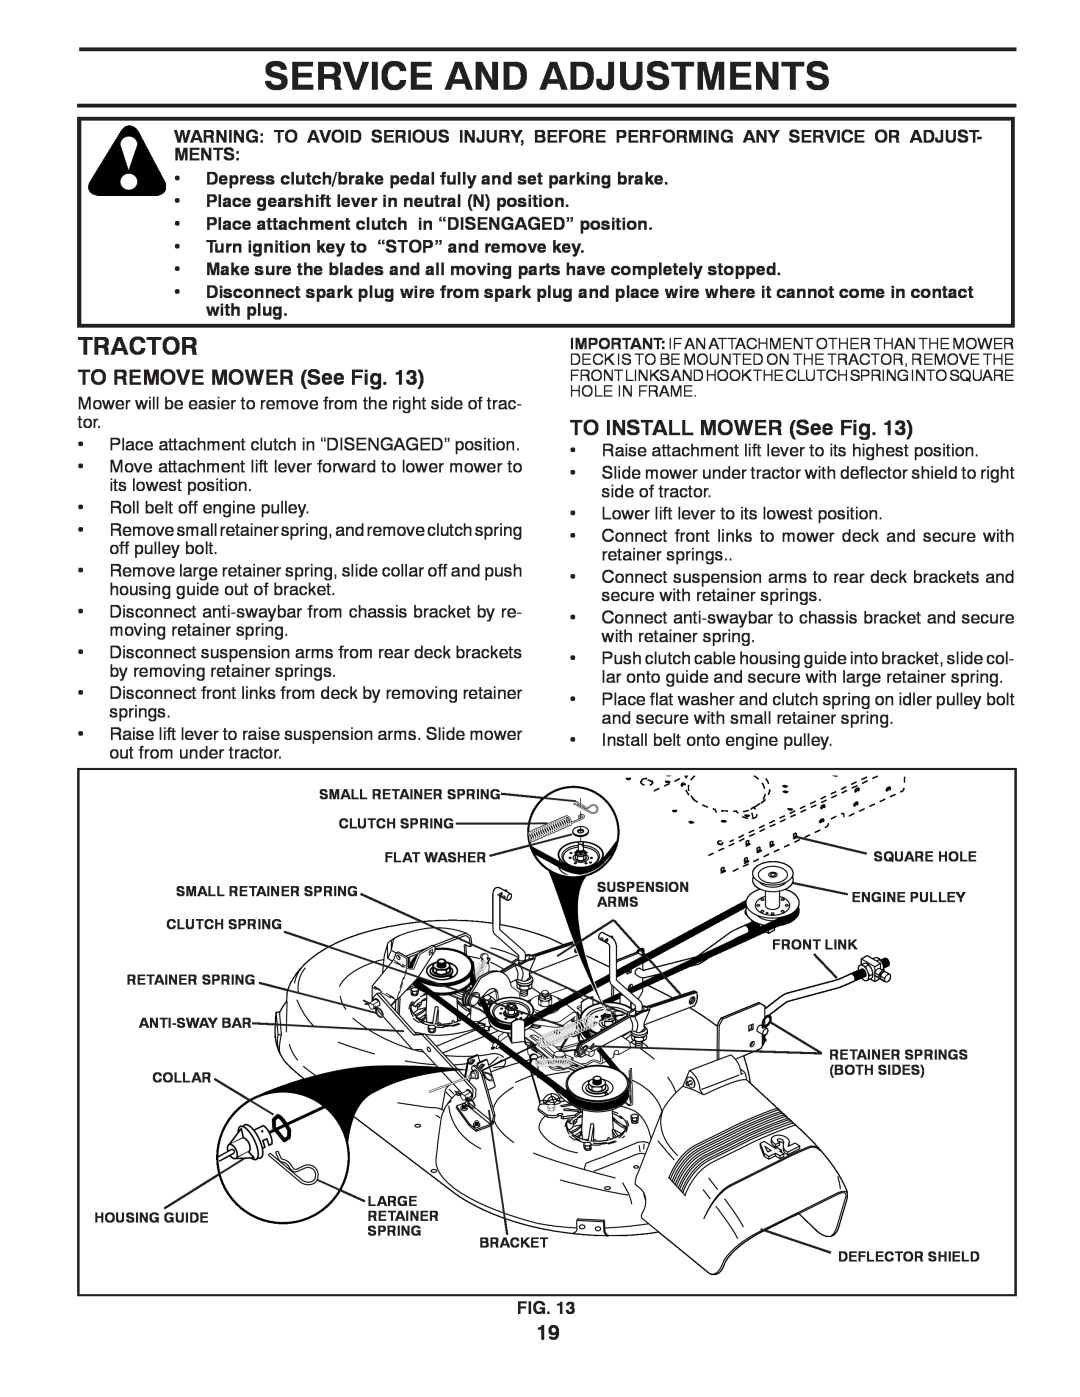 Poulan 418745, 96012008300 manual Service And Adjustments, TO REMOVE MOWER See Fig, TO INSTALL MOWER See Fig, Tractor 